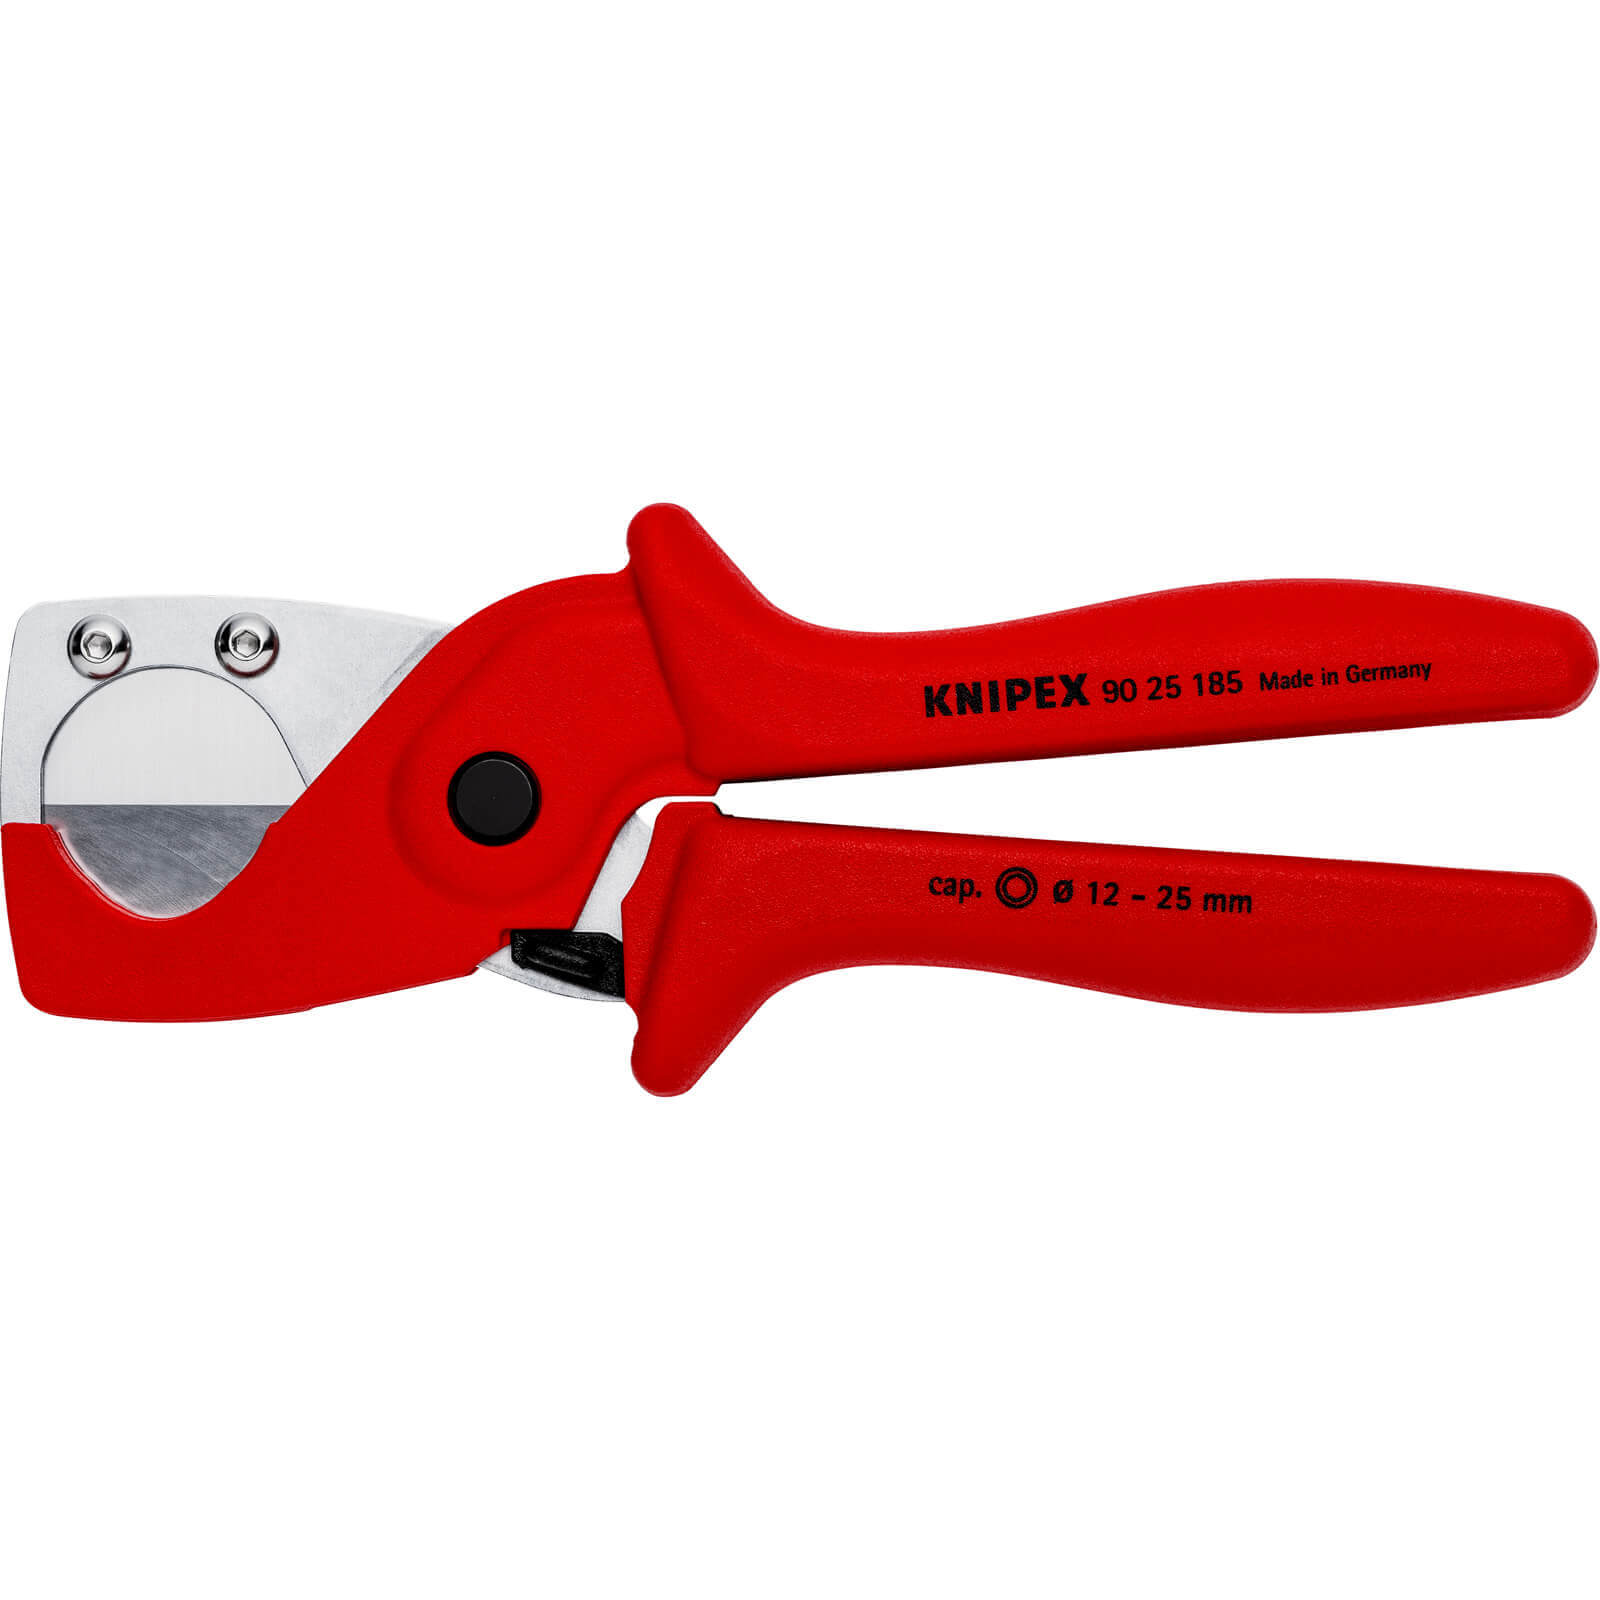 Image of Knipex 90 25 Pipe Cutter For Plastic Pipes